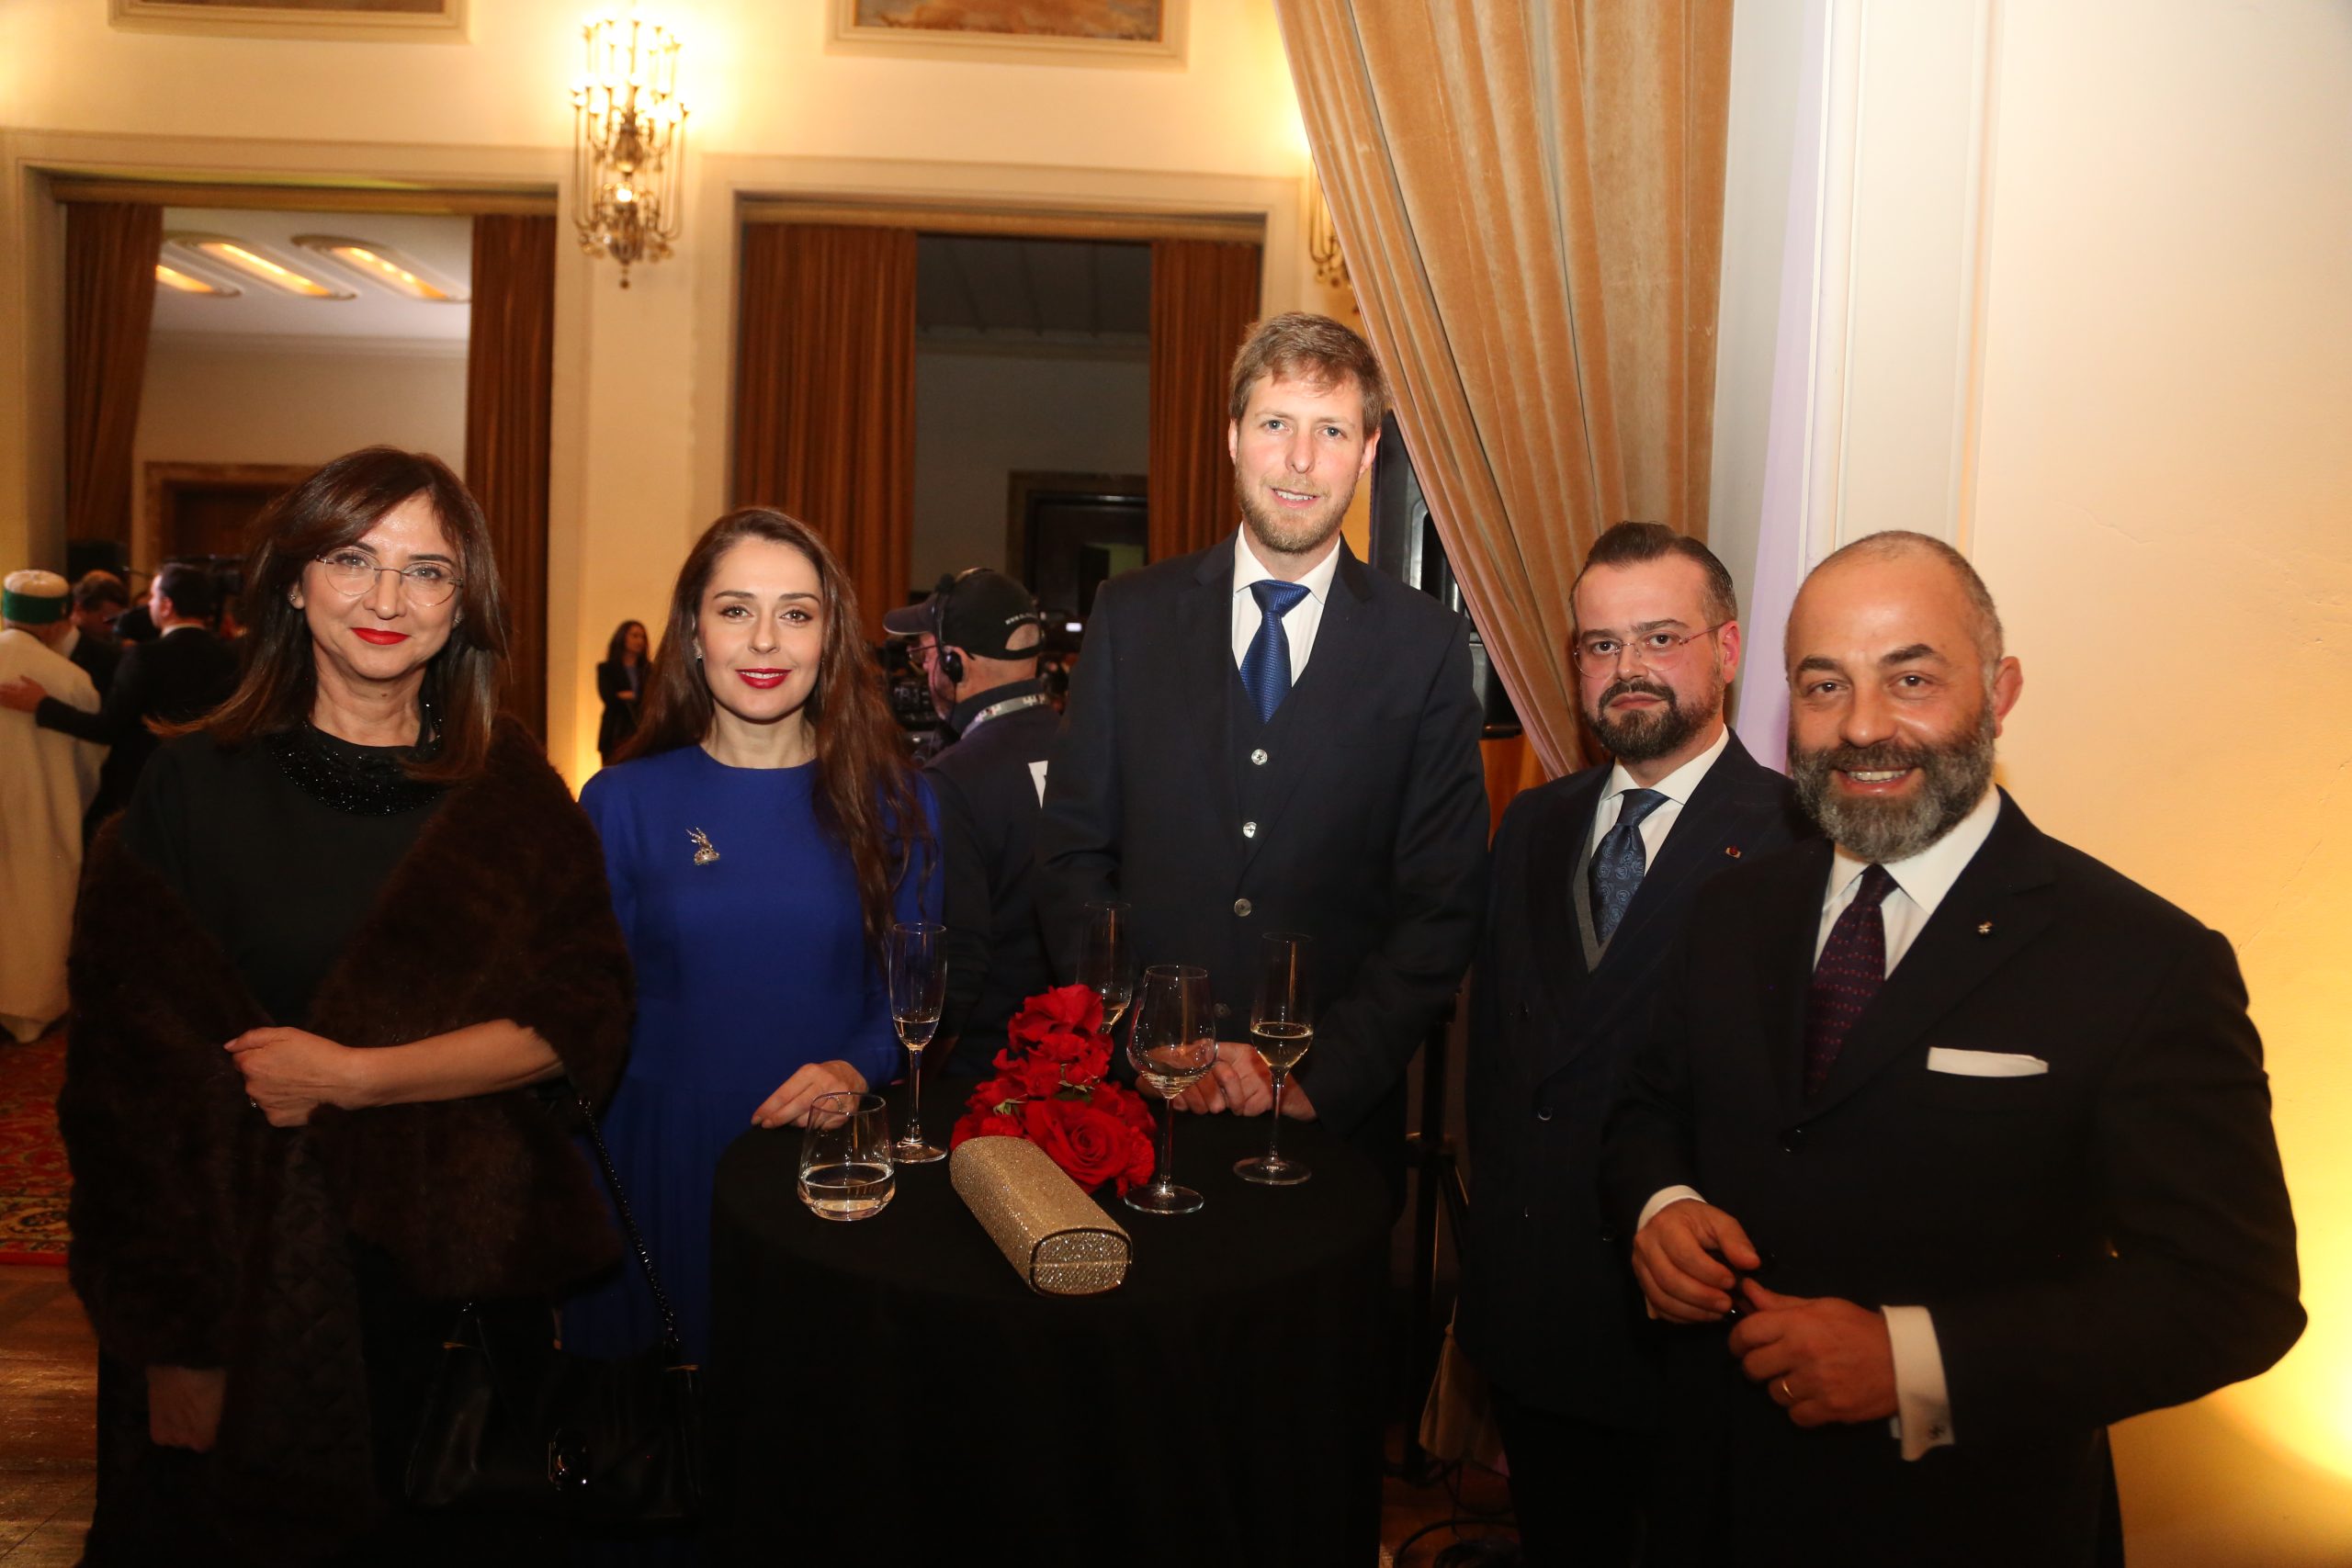 Reception on the occasion of the 110th Anniversary of Albania’s Independence